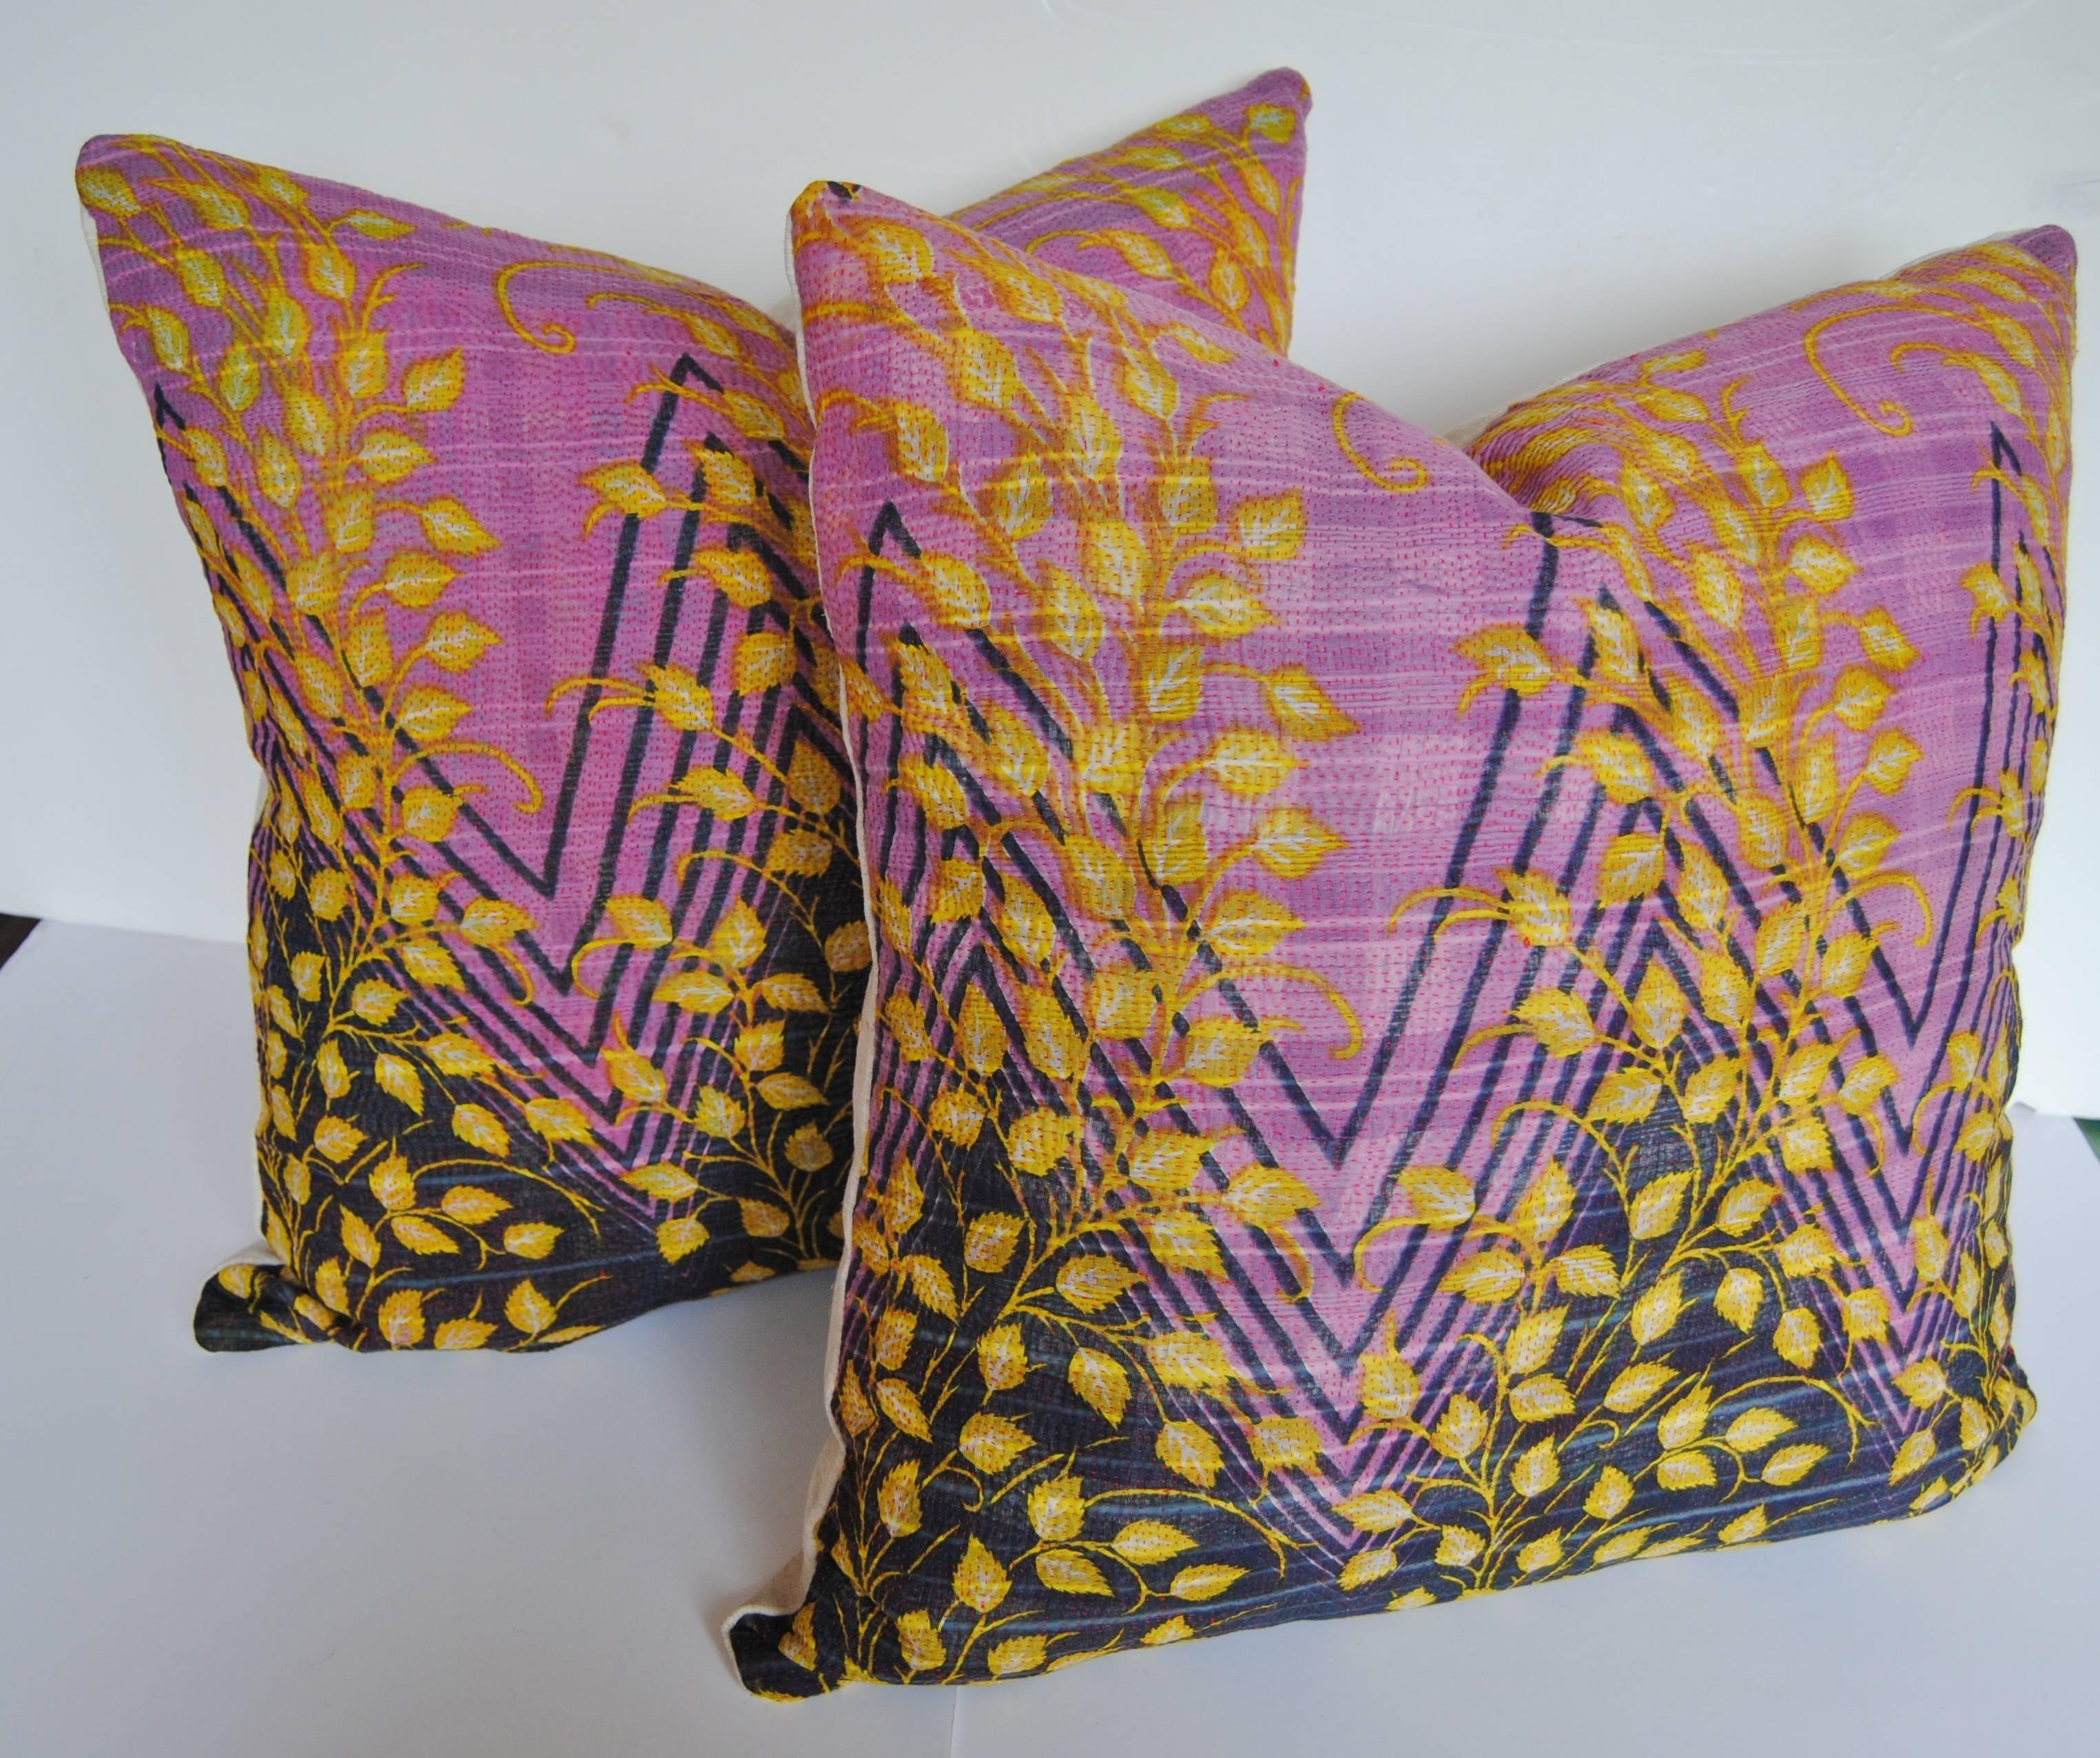 Custom pair of finely stitched cotton kantha pillows. The kantha quilt is made in India from 4 to 6 layers of vintage cotton saris quilted together. The contrast color stitching on this textile is very finely done. Pillow is backed with an ivory